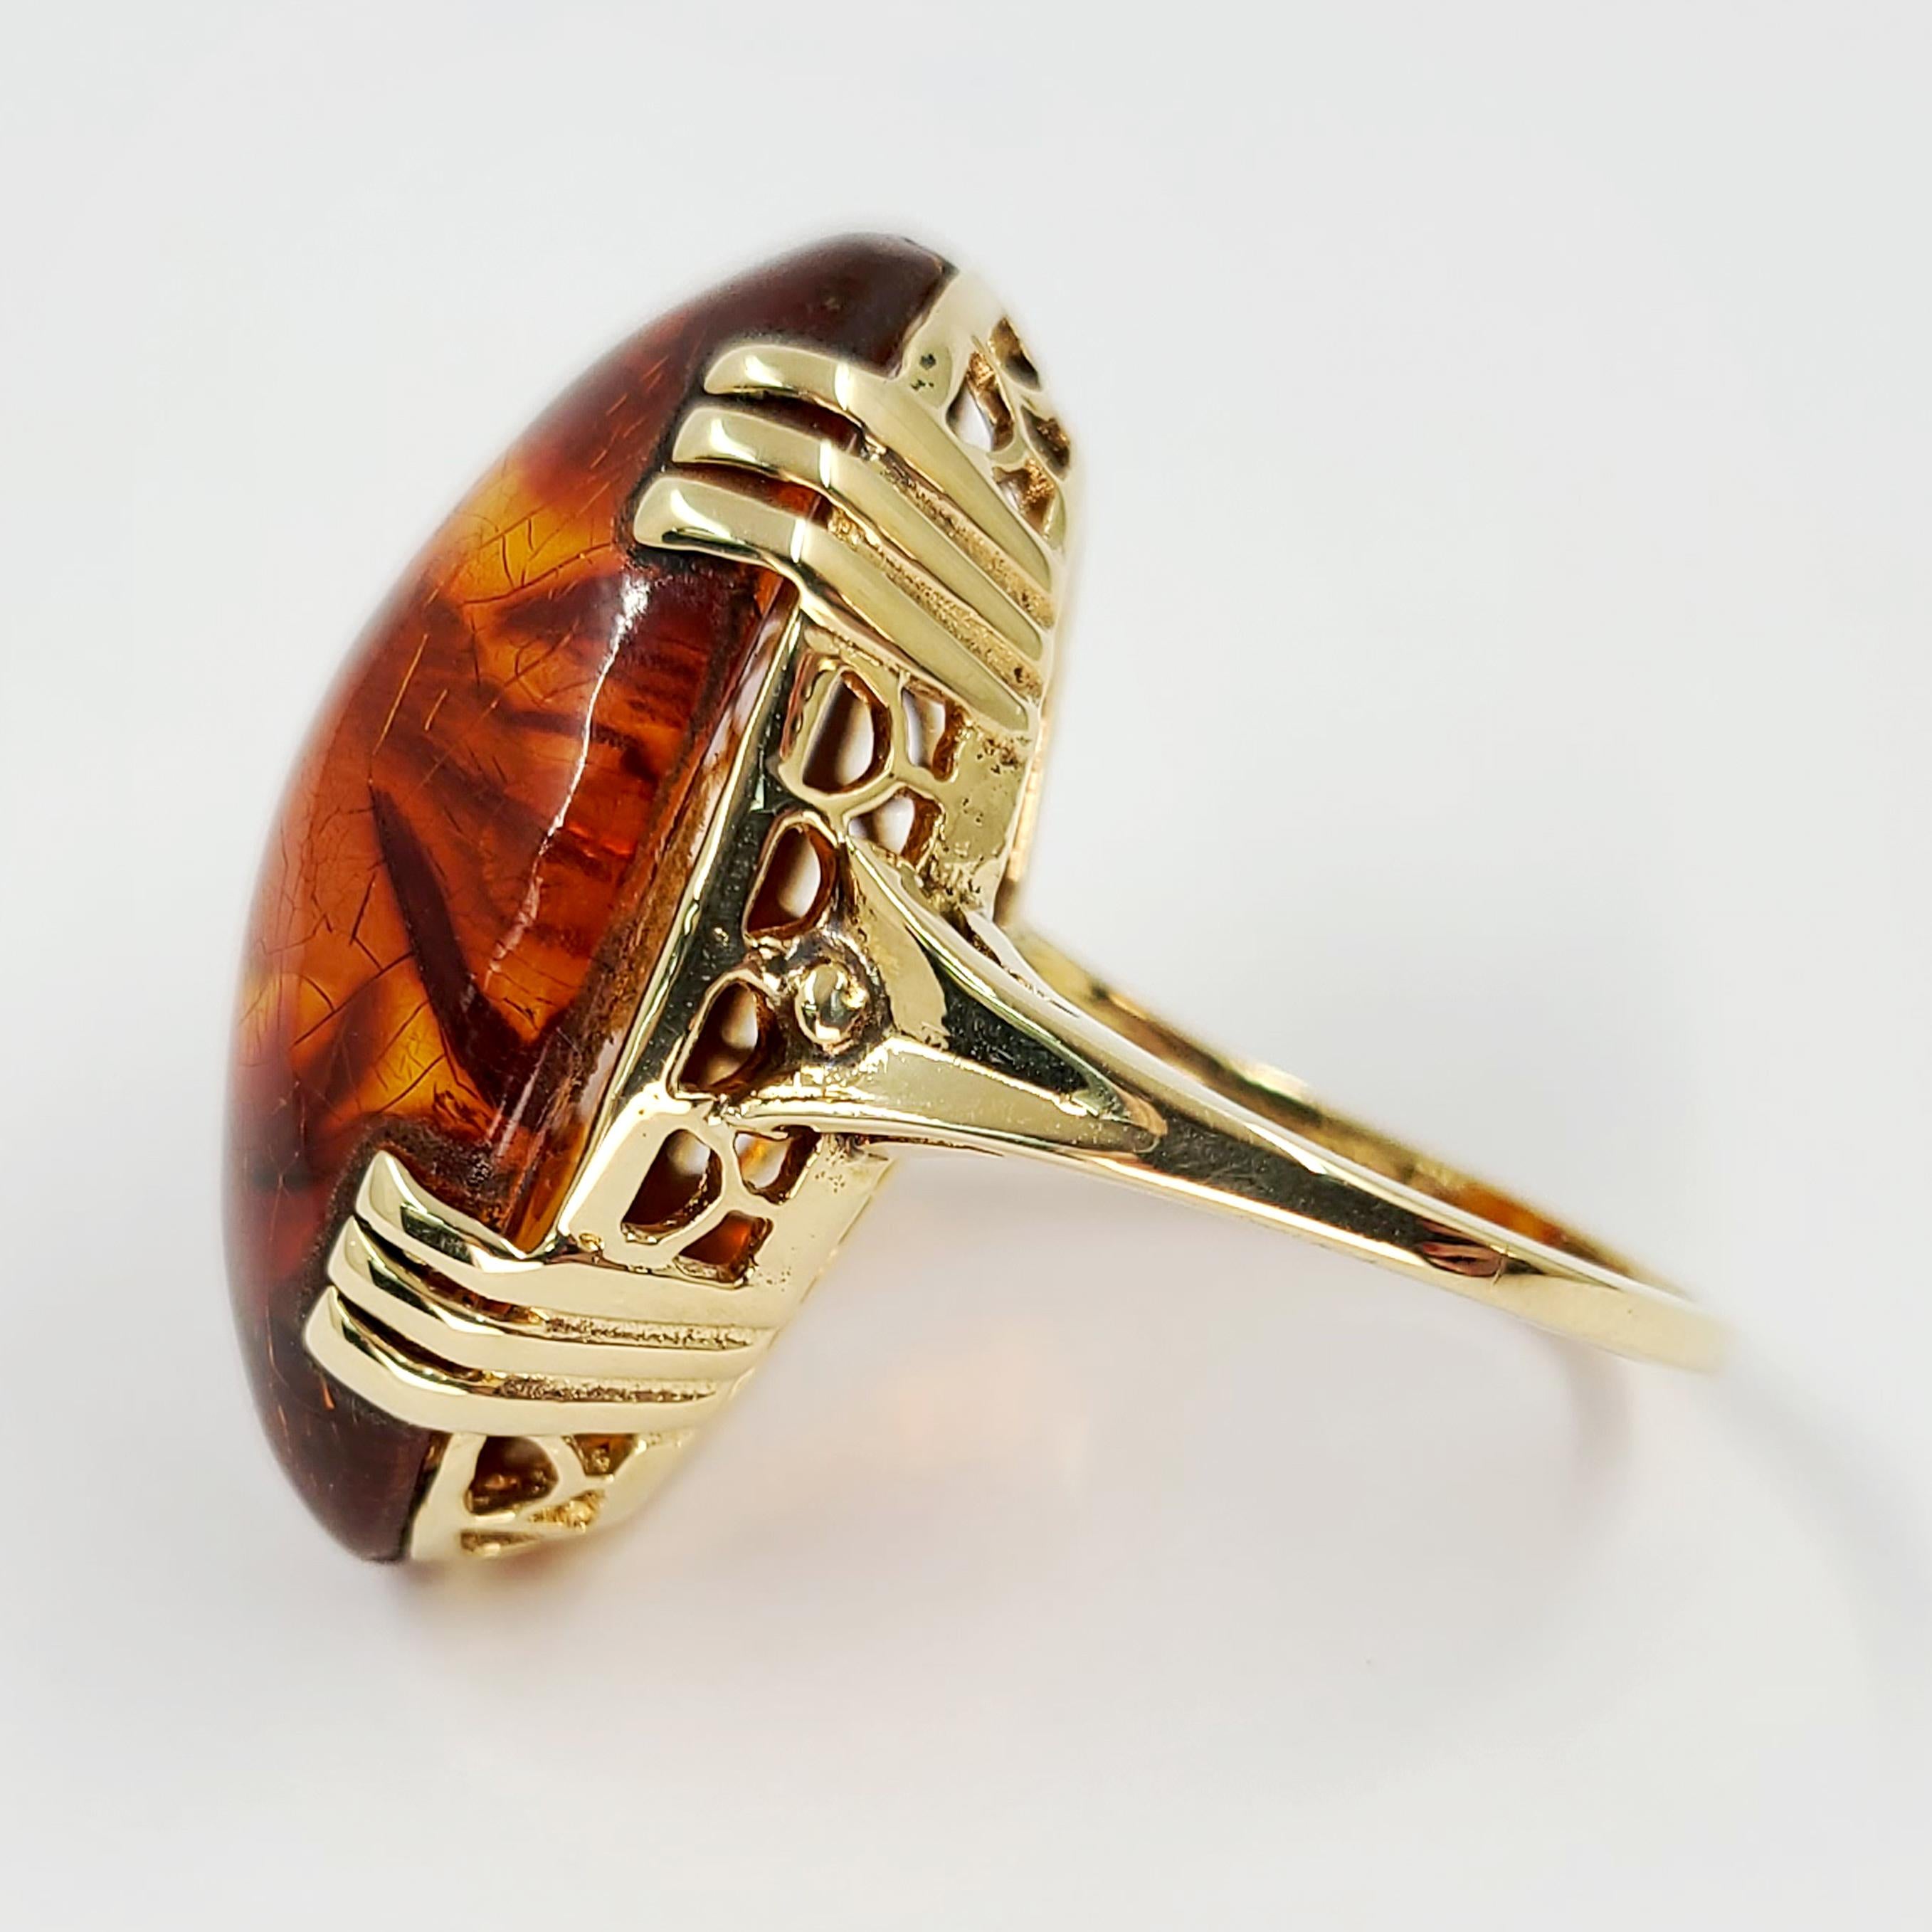 14 Karat Yellow Gold Cocktail Ring Featuring A 29mm x 18mm Oval Cabochon Amber. Current Finger Size Is 8; Purchase Includes One Sizing. Finished Weight is 7.9 Grams.